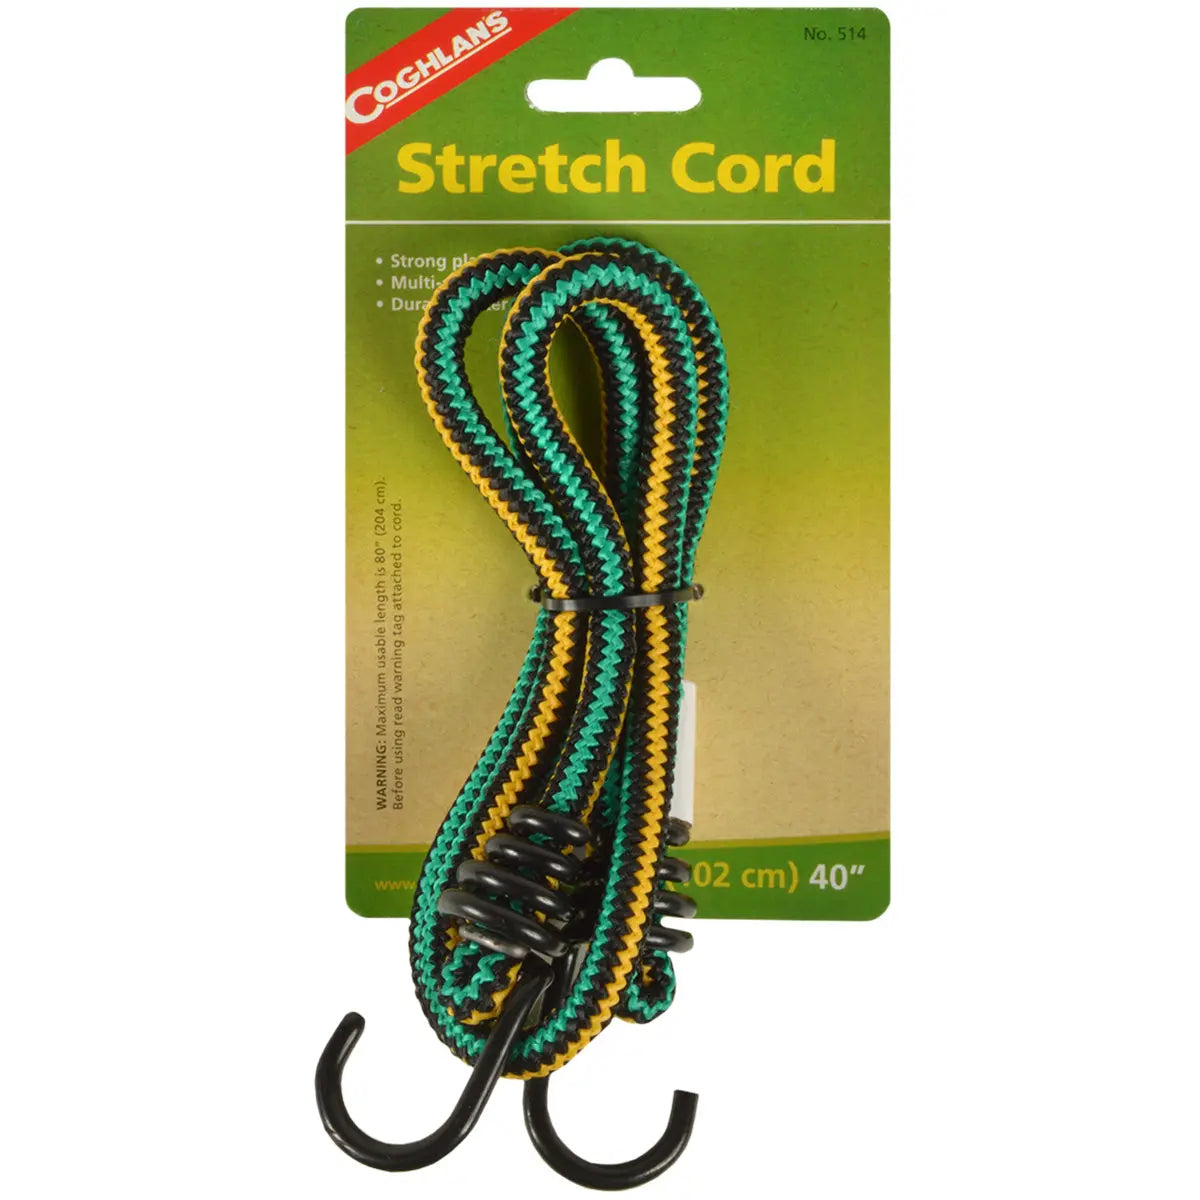 Coghlan's 40" Stretch Cord with Plastic Hooks Coghlan's